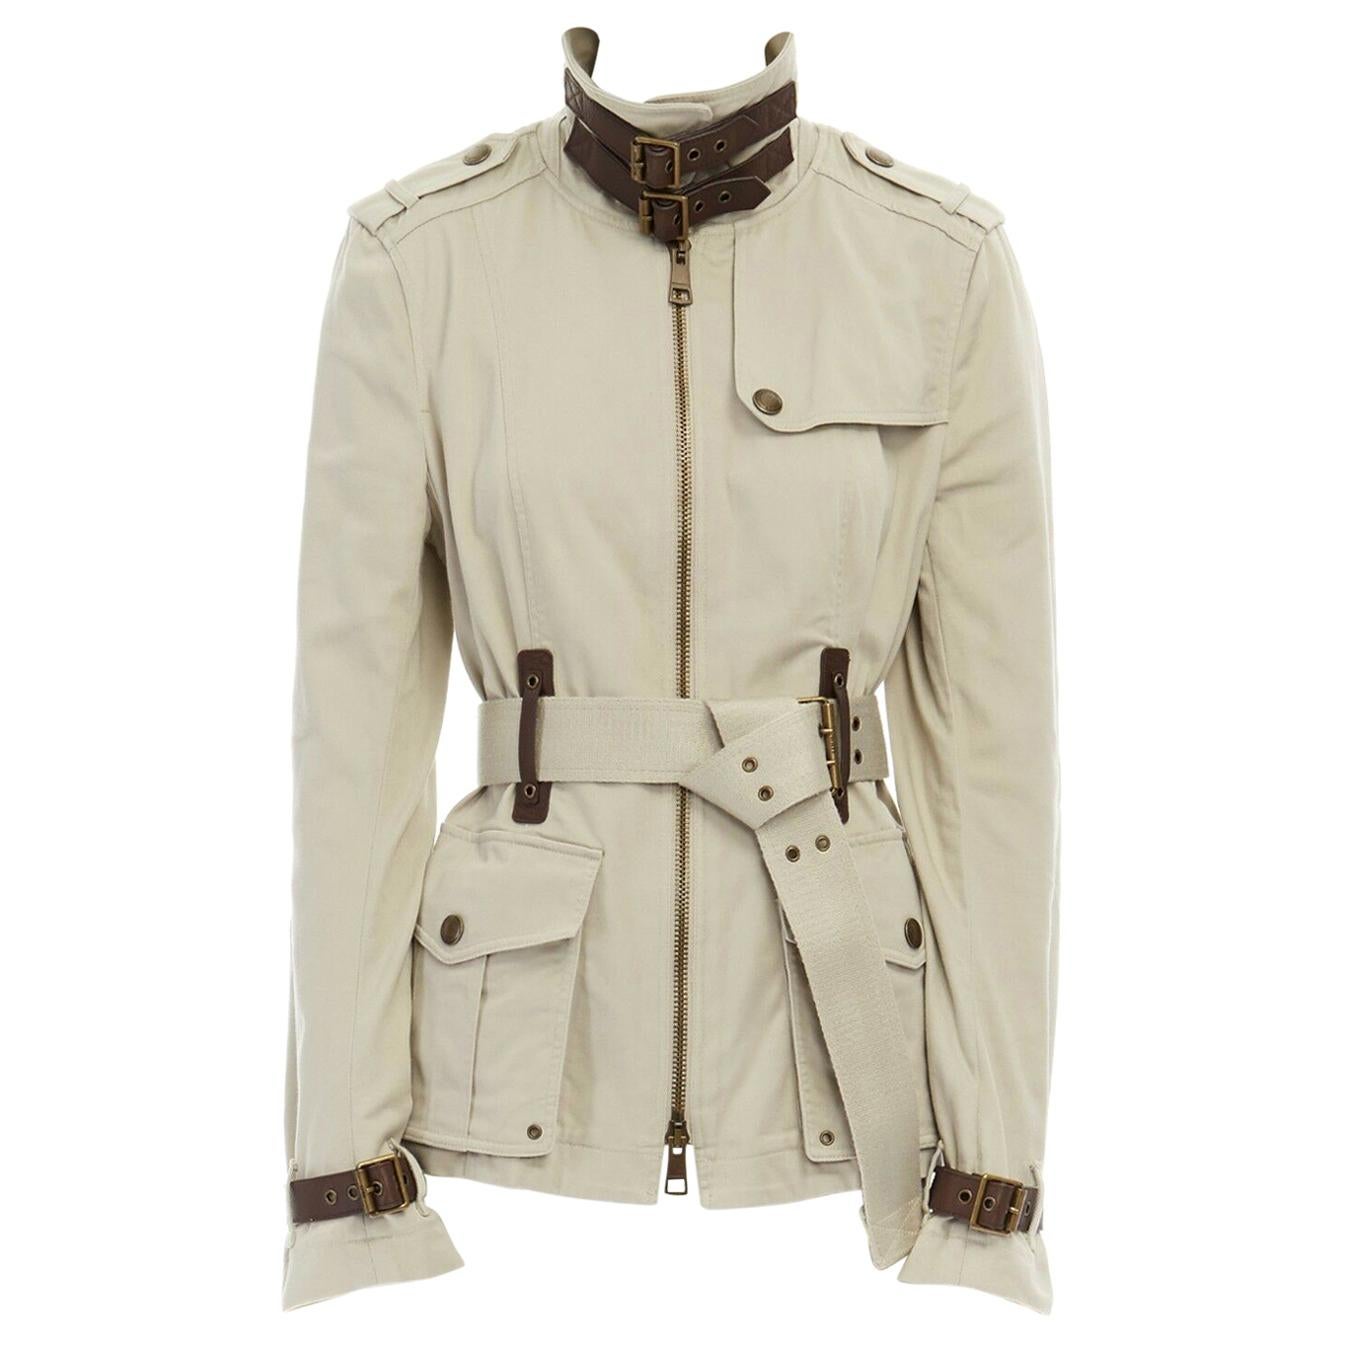 BURBERRY BRIT beige cotton leather trimmed belted safari trench field jacket M